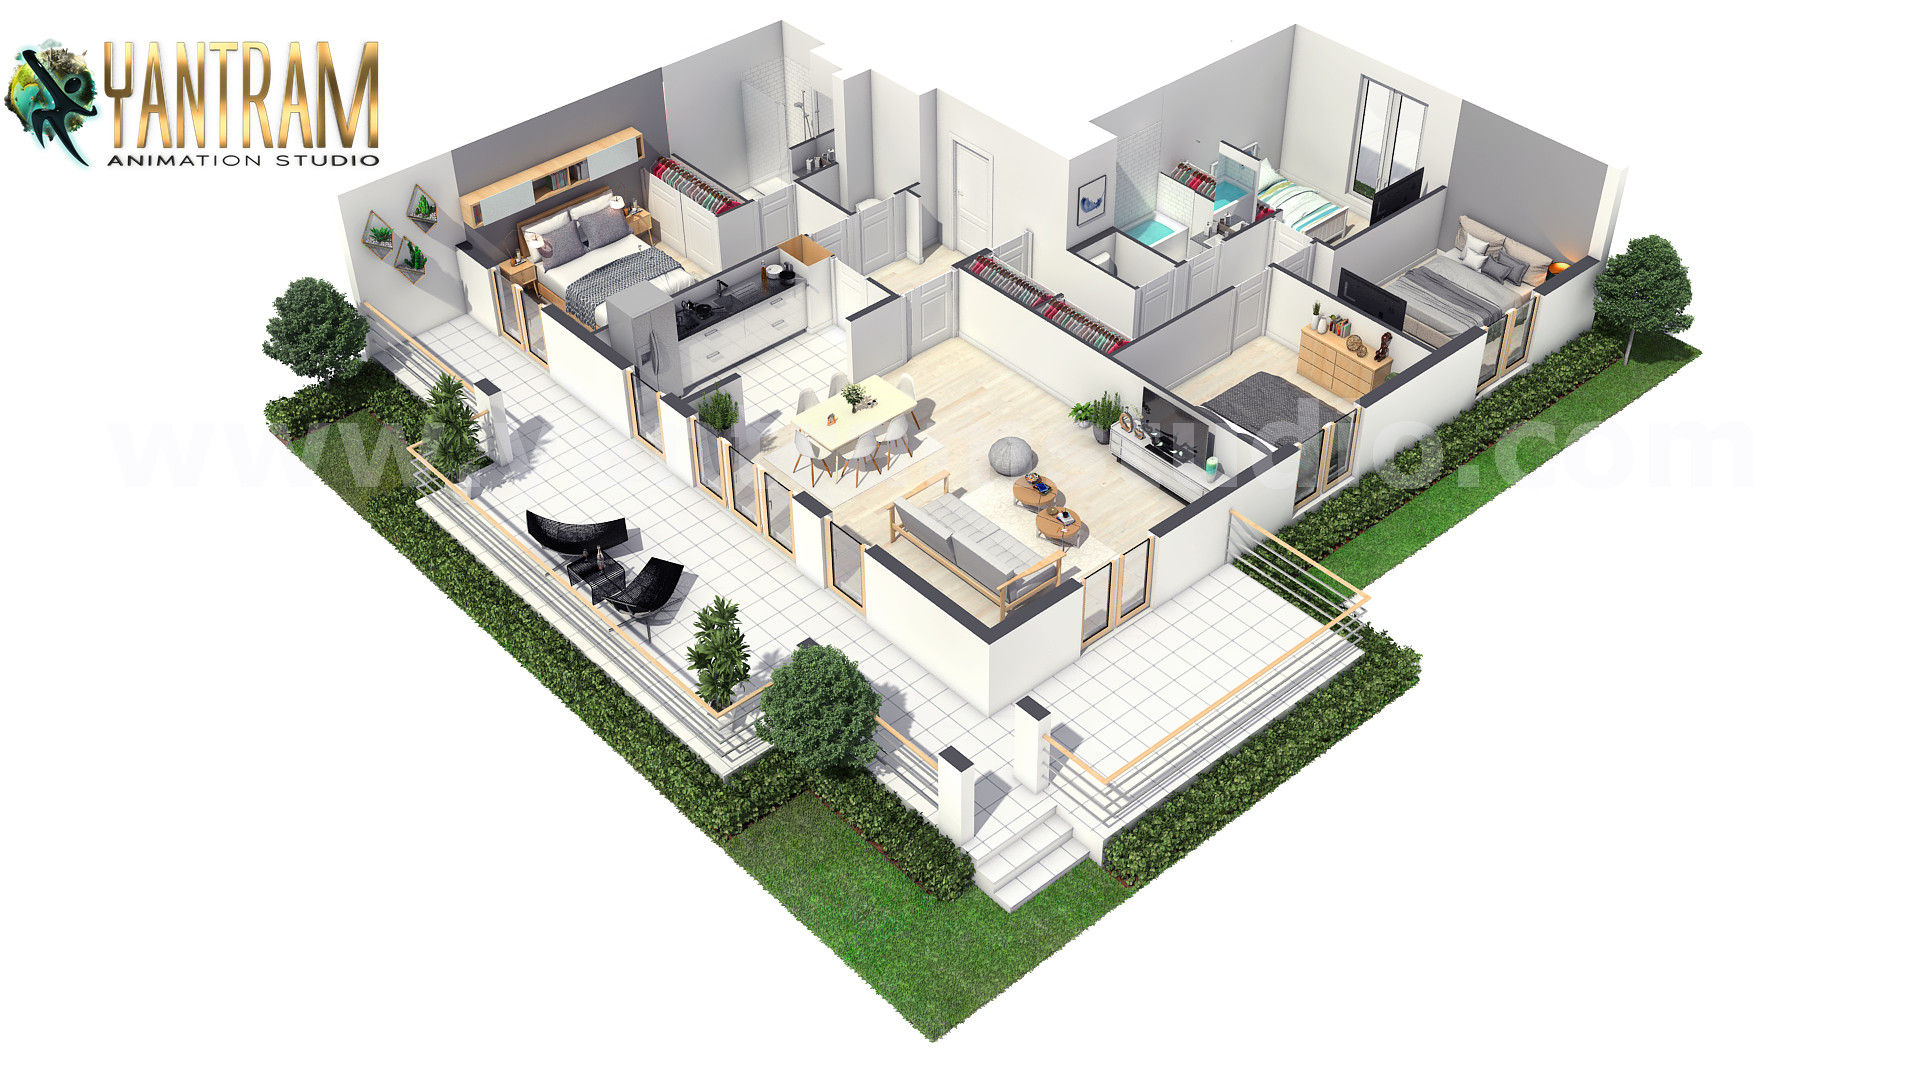 Modern House 3D Floor Plan Design with unique landscaping ideas by Architectural Rendering Companies, Milan – Italy Yantram Animation Studio Corporation Floors Bricks floor plan,container house,design,designer,rendering,landscaping,ideasconcept,virtualdesign